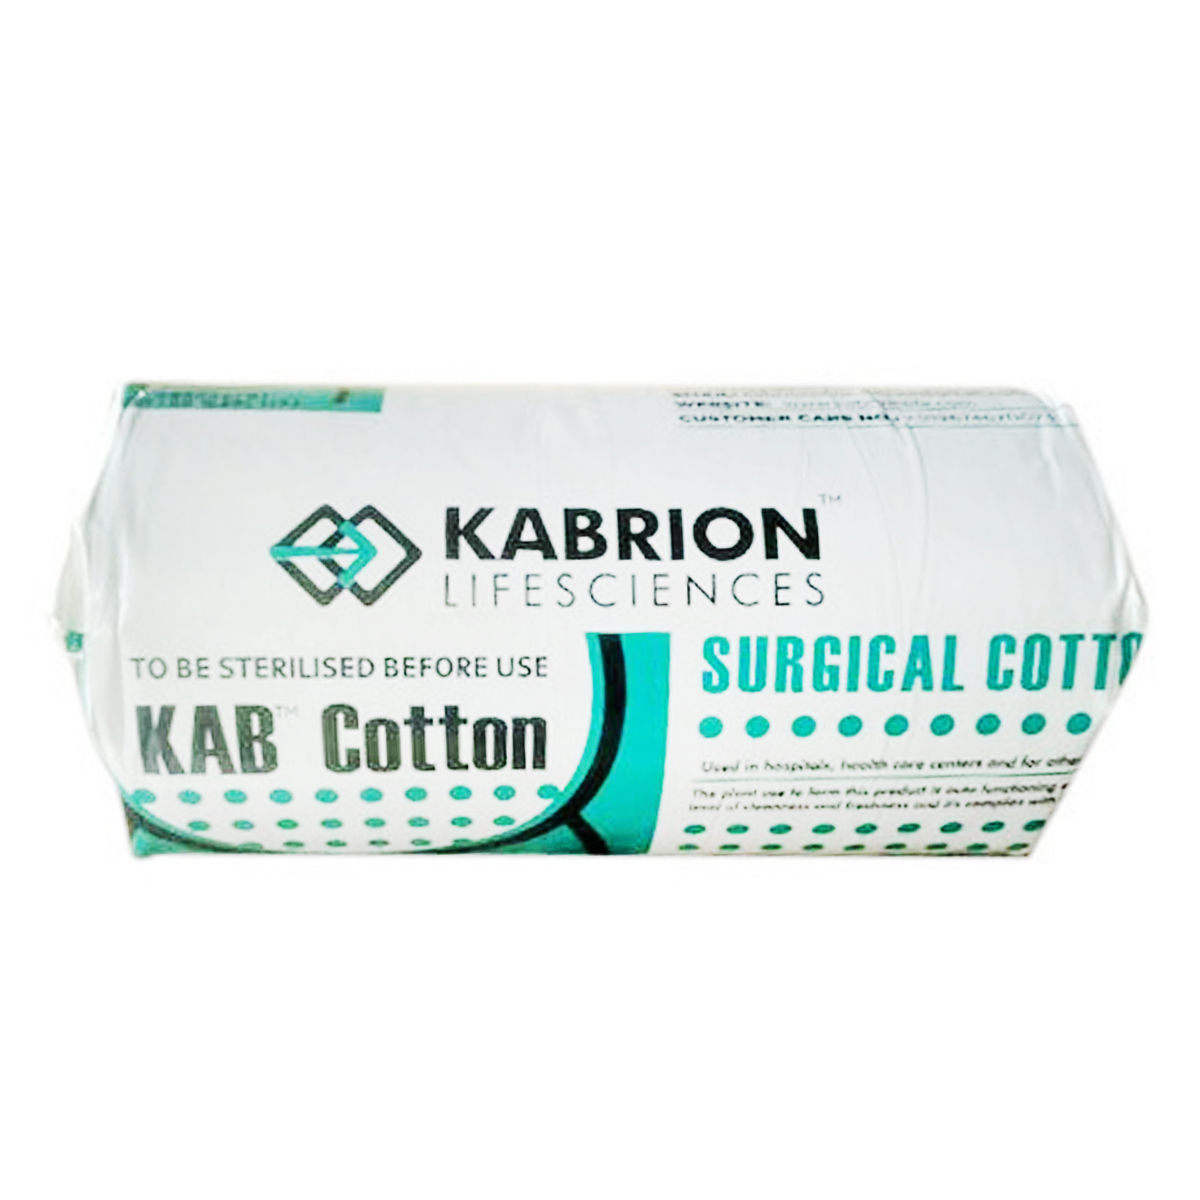 Buy Kabrion Surgical Cotton, 400 gm Online